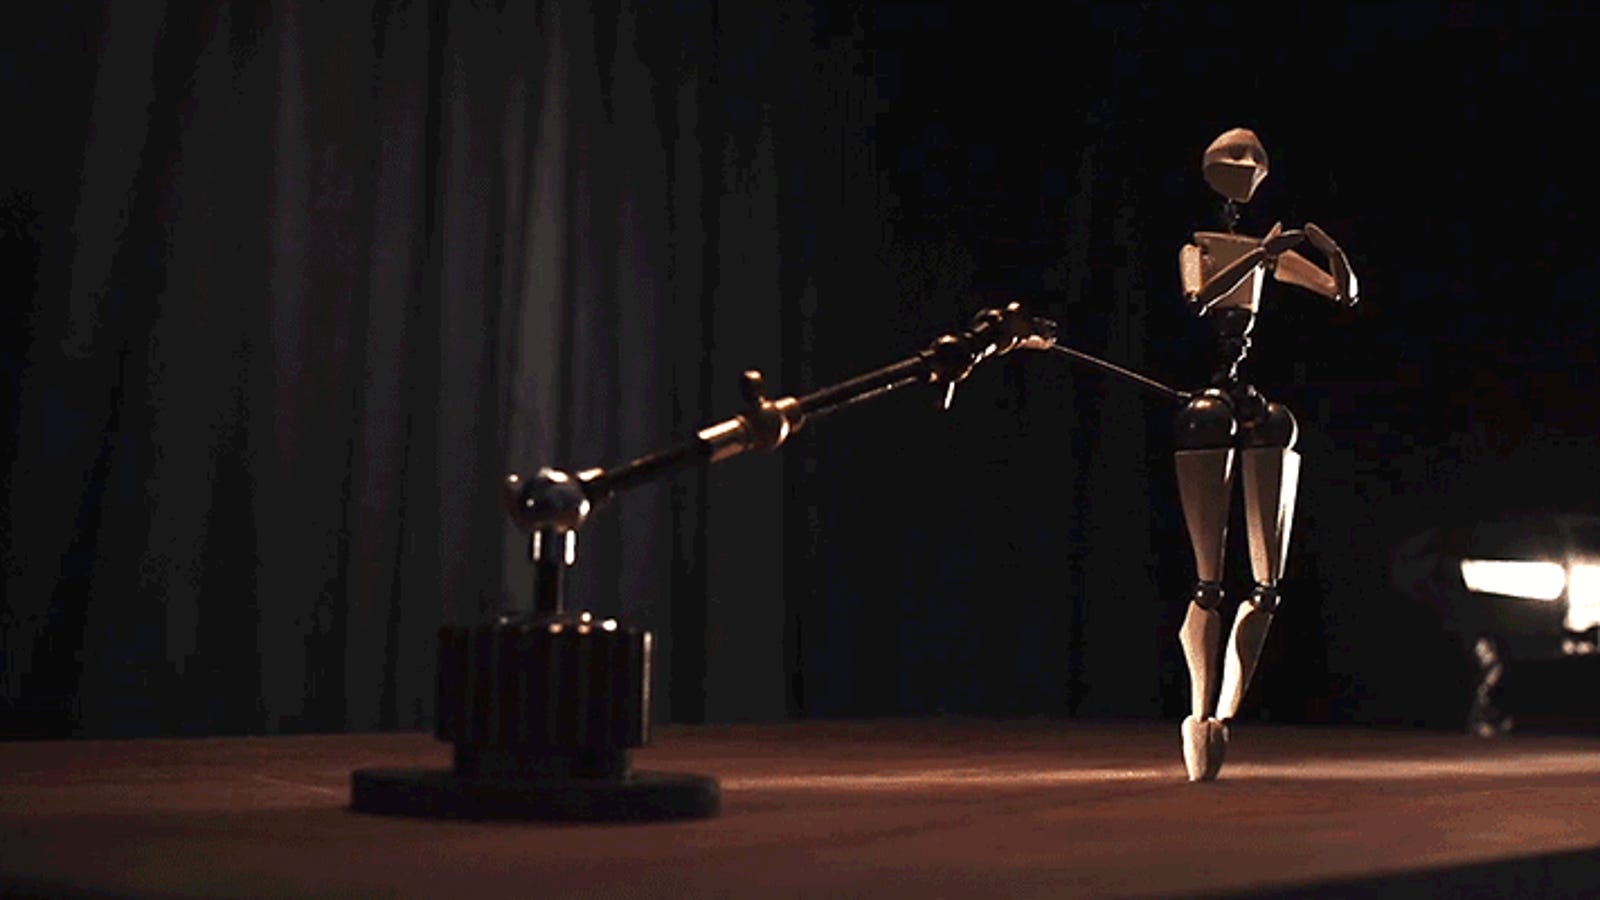 Fascinating StopMotion Film Reveals All the Animation Gear You Never See